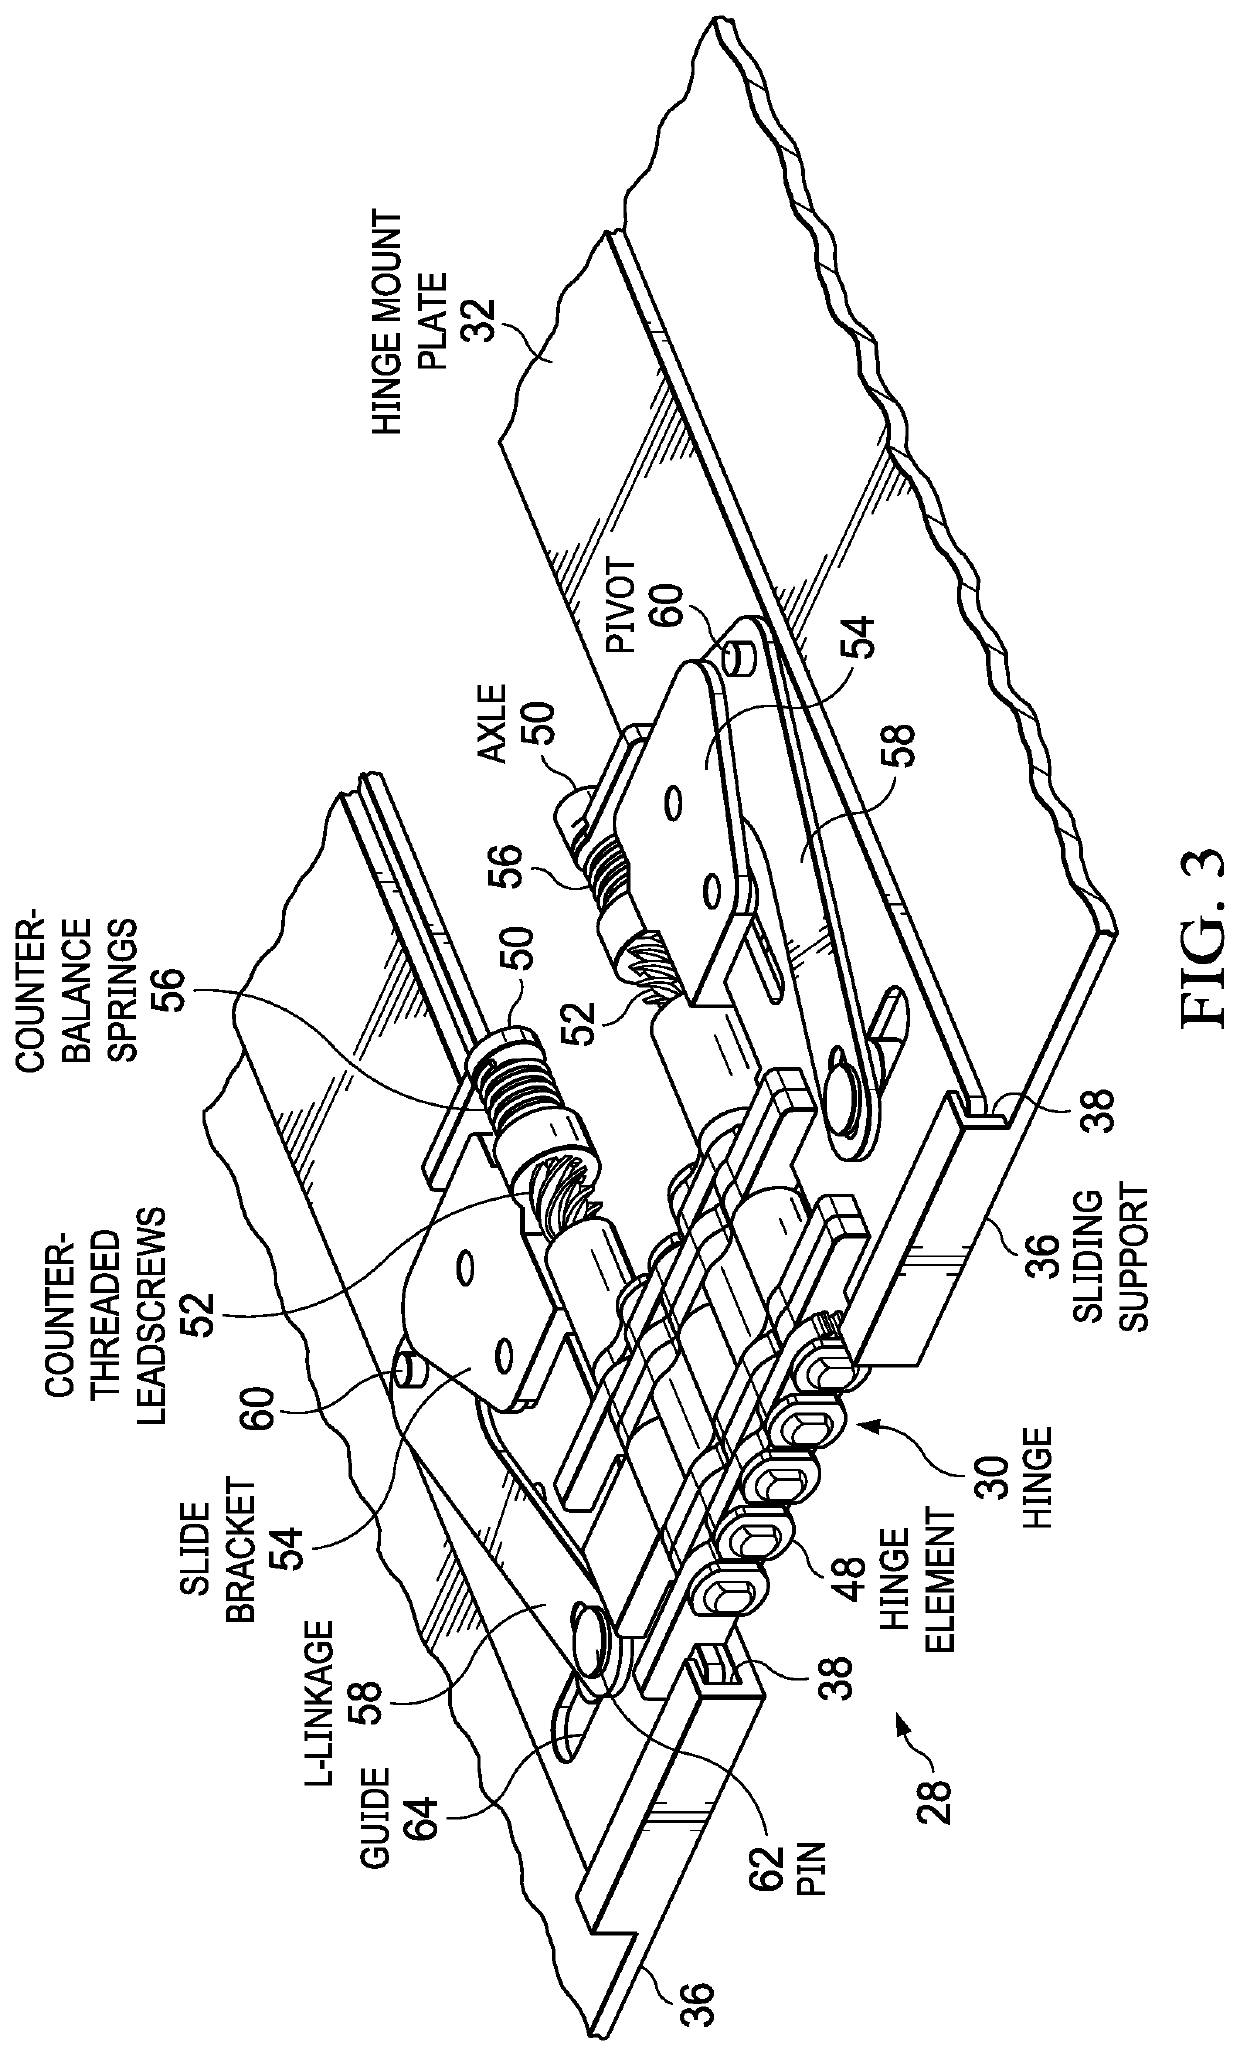 Multi-axis hinge translation to adjust housing position relative to flexible display position